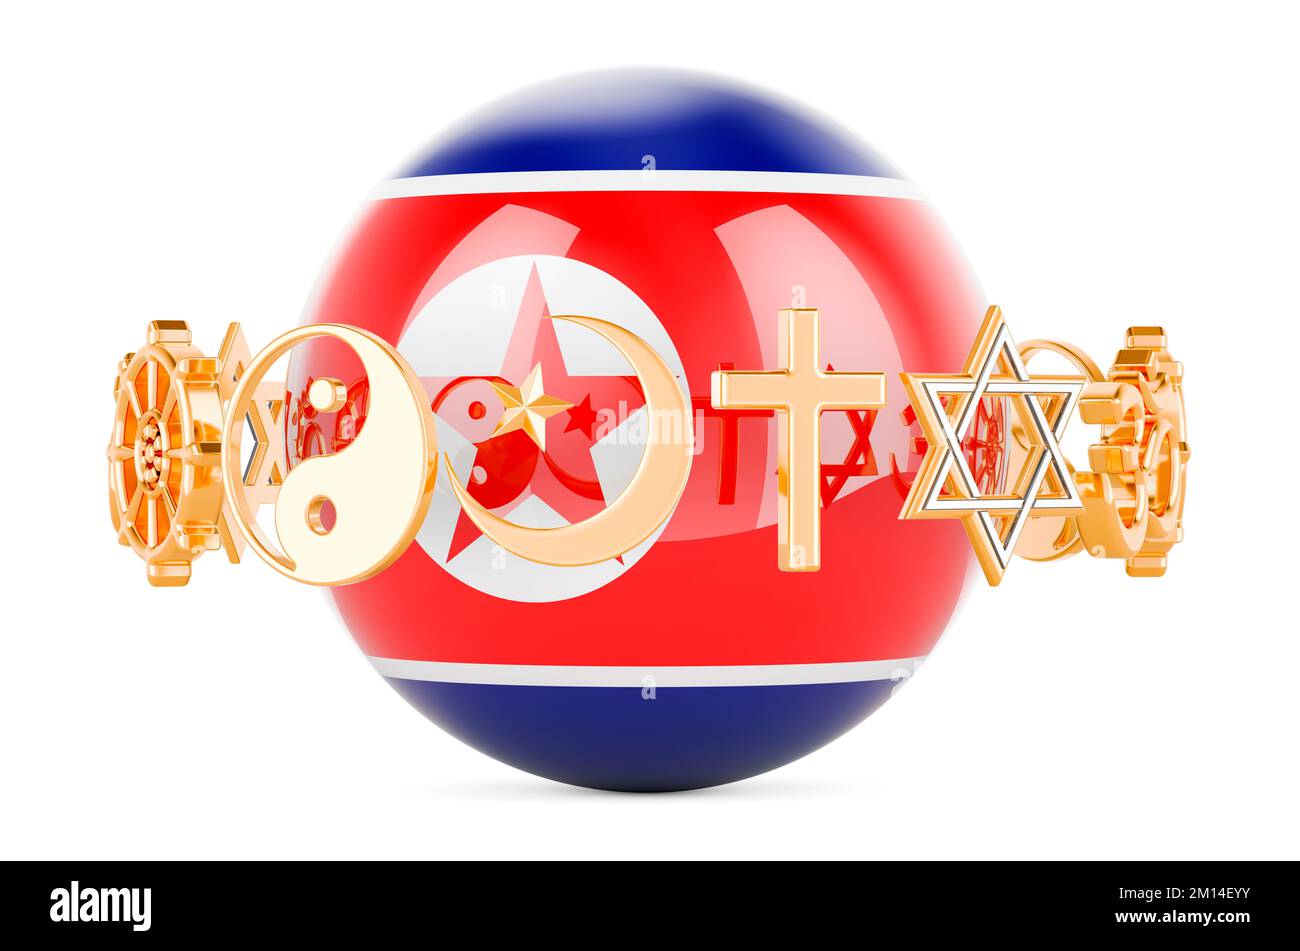 North Korean flag painted on sphere with religions symbols around, 3D rendering isolated on white background Stock Photo